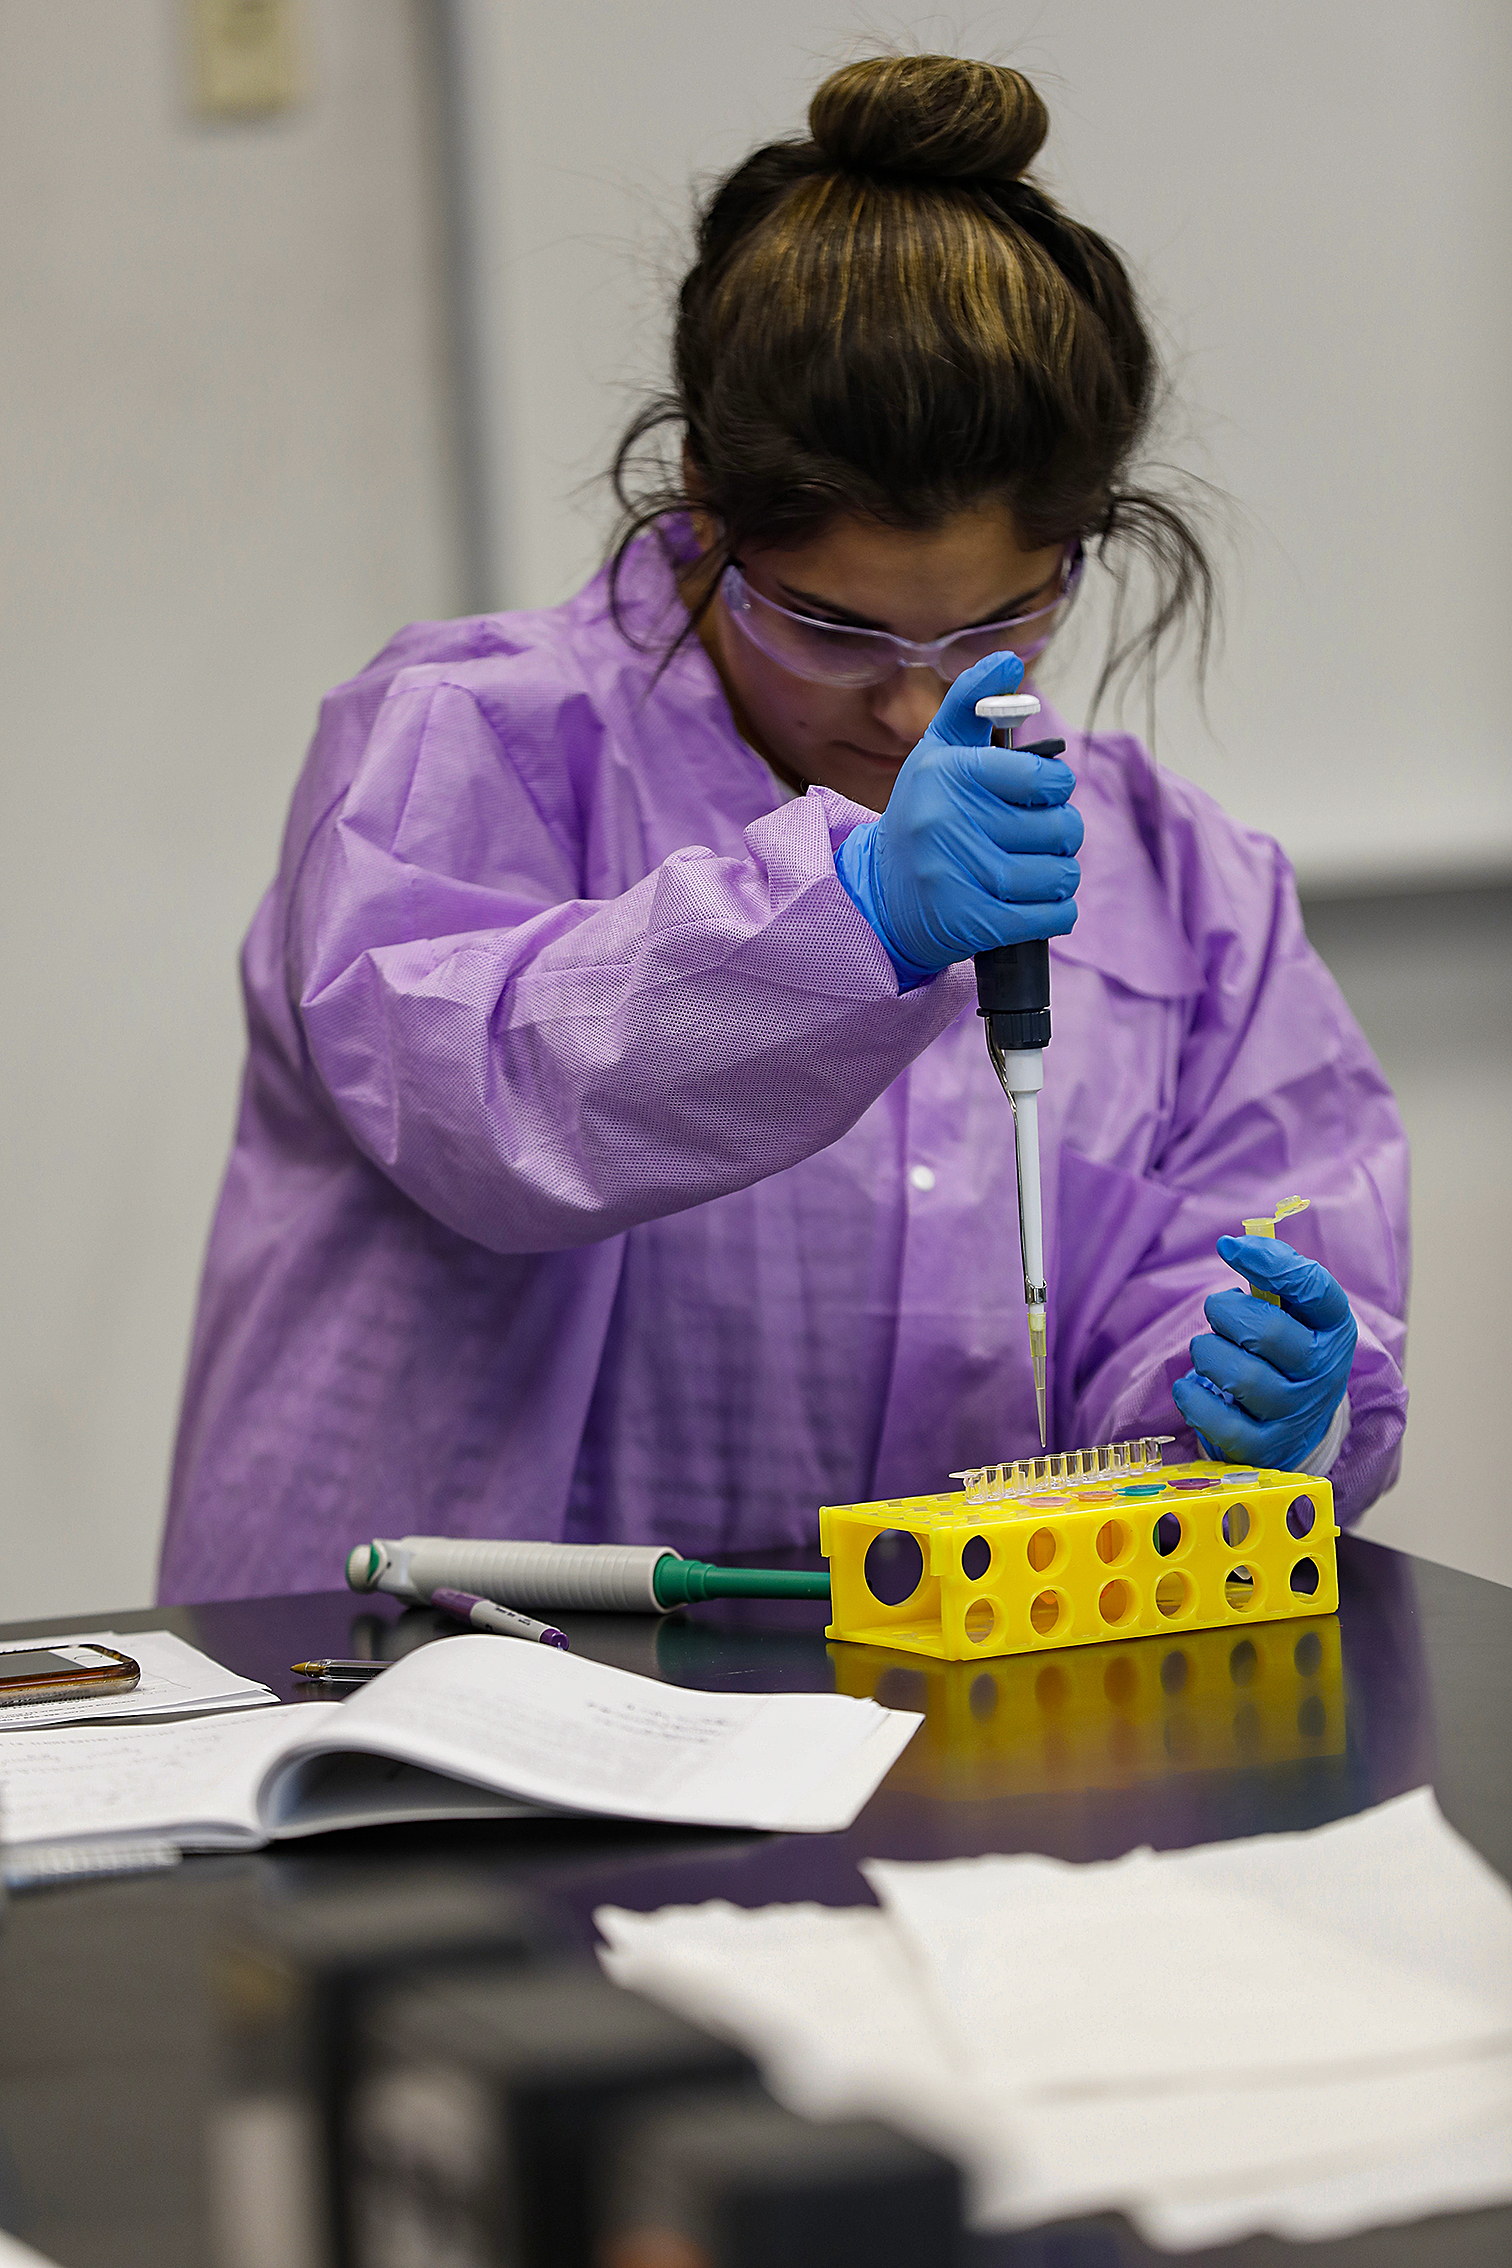 A female student working on an experiment in the chemistry lab.